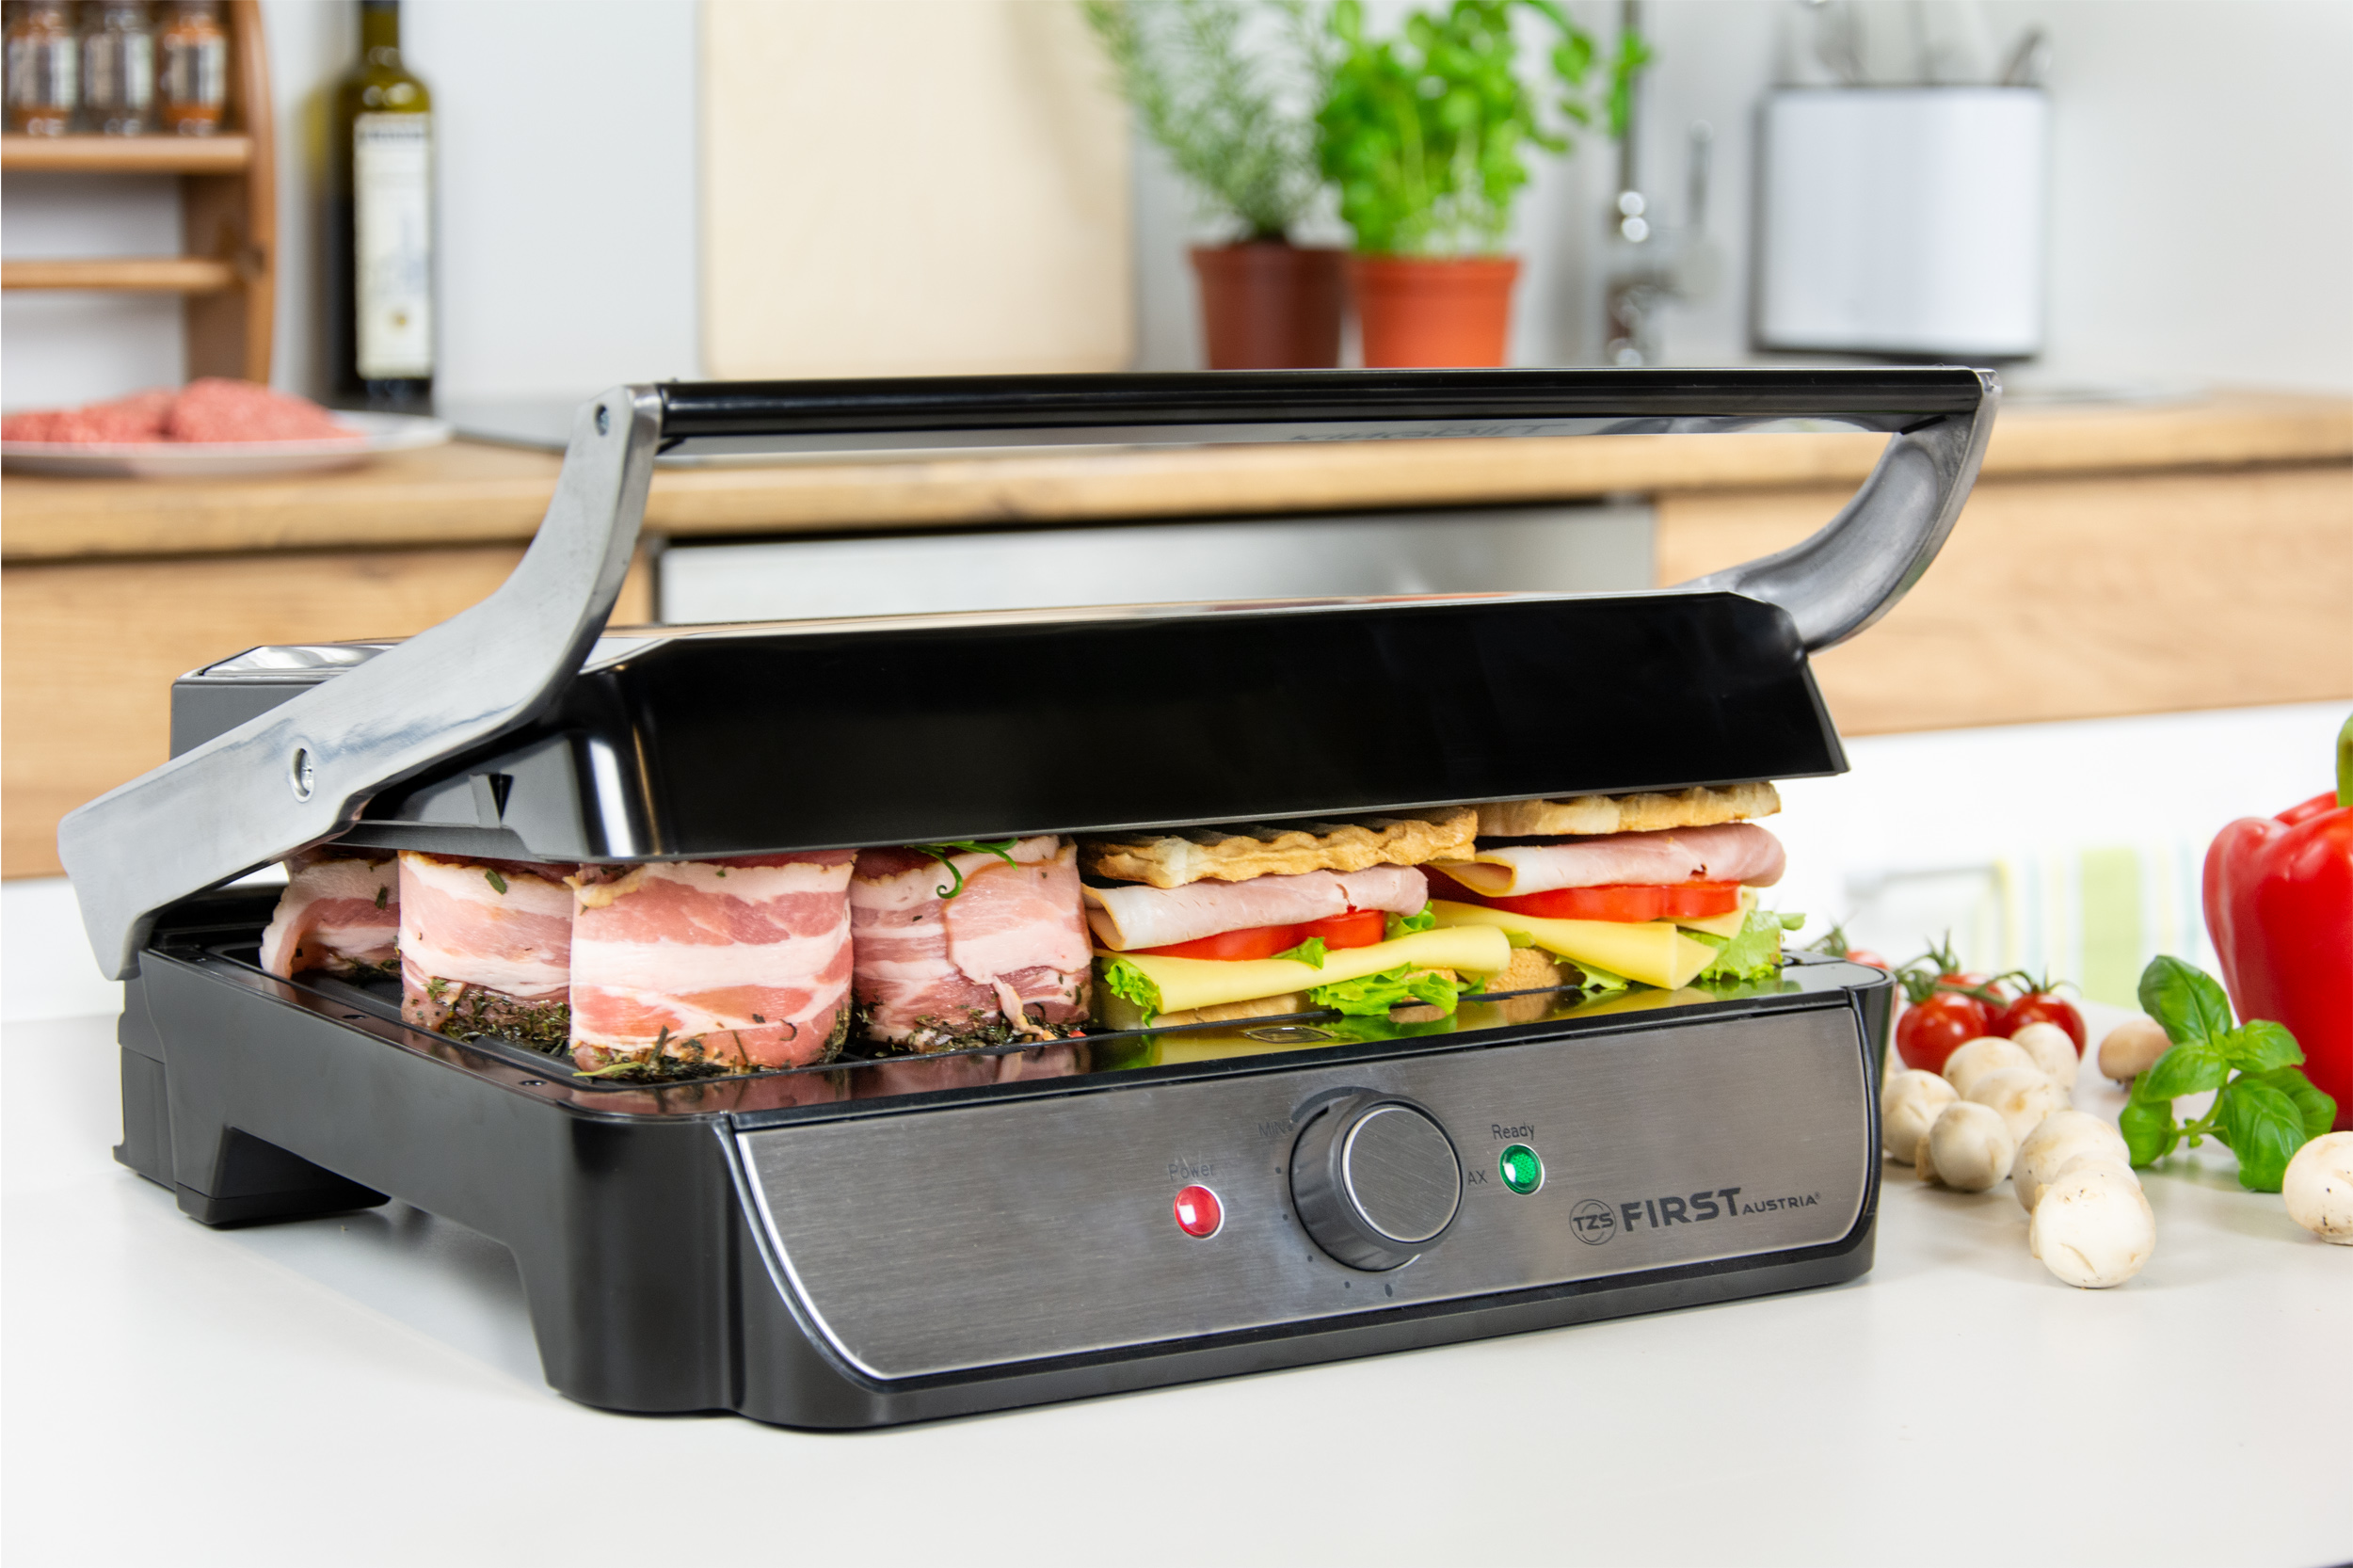 Table grill 2000 watts | 180 ° | Removable panels